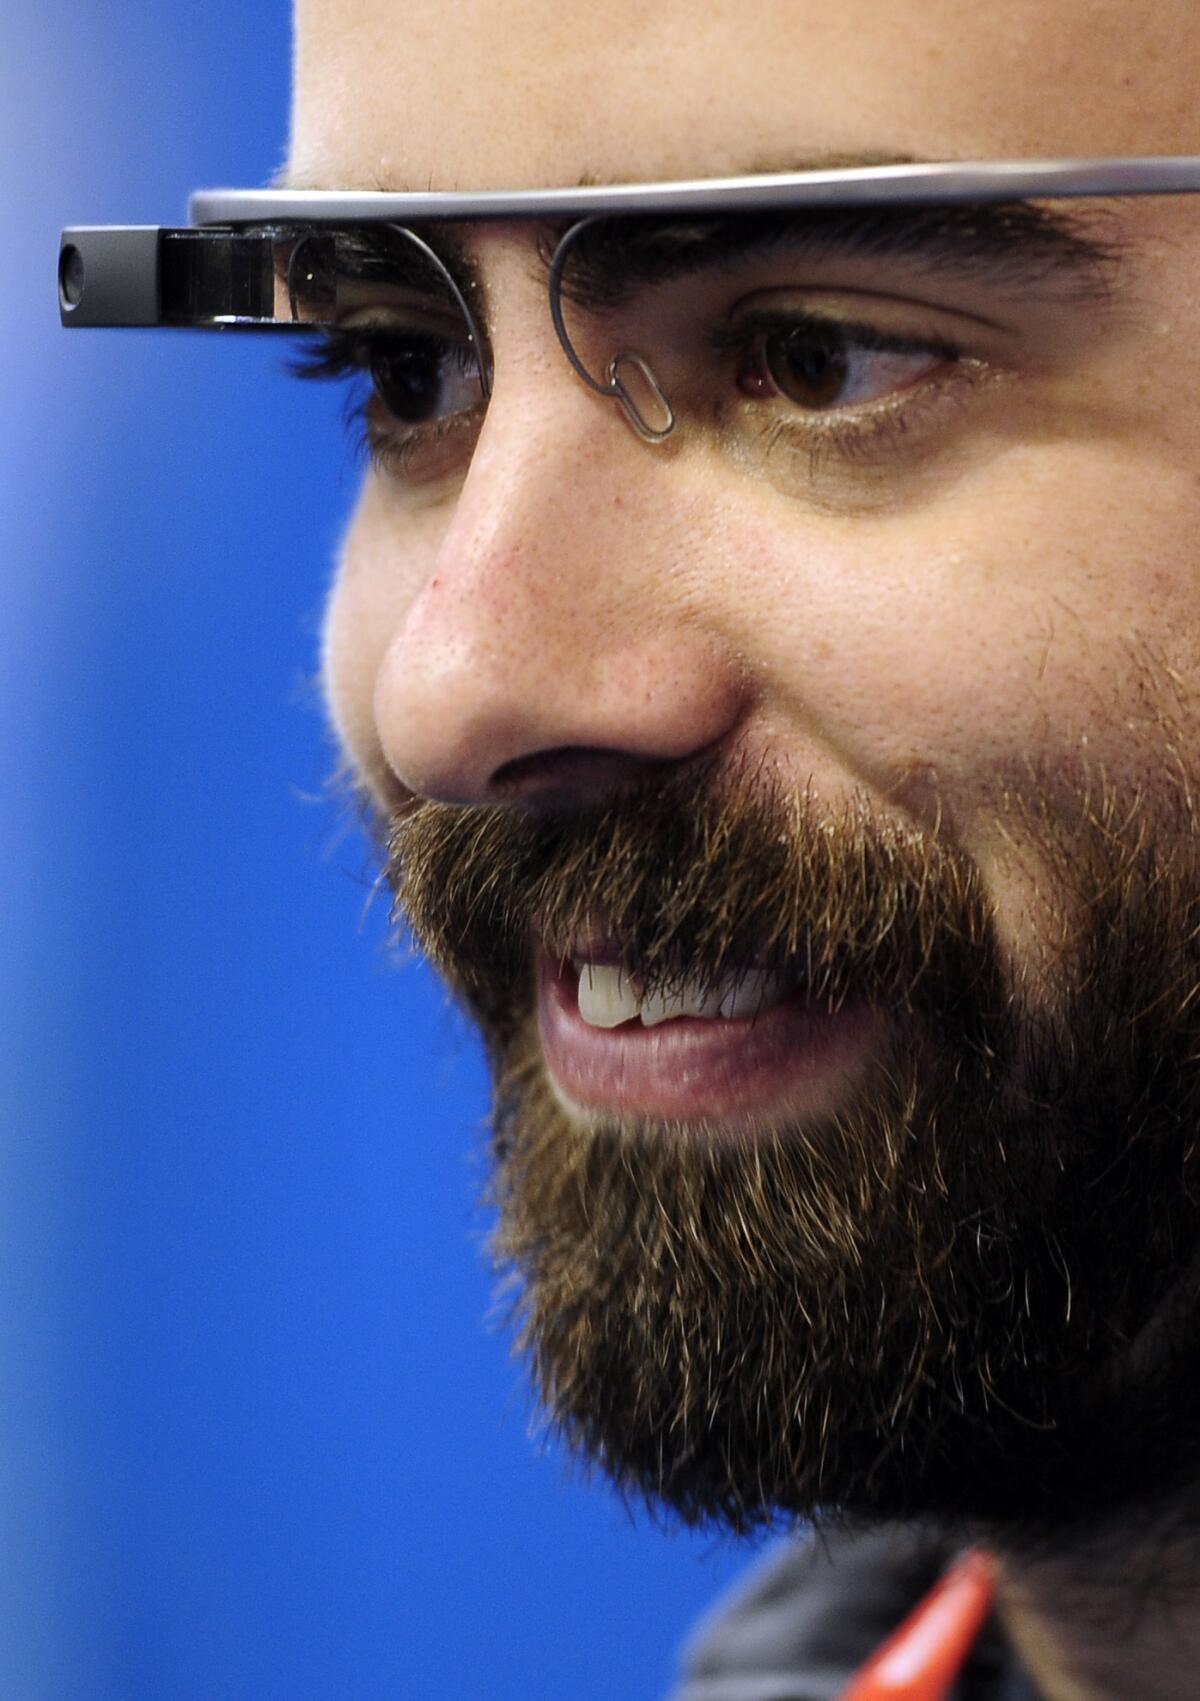 A visitor uses the Google Glass at the Mobile World Congress, the world's largest mobile phone trade show, in Barcelona, Spain. Privacy concerns have prompted some businesses to prohibit them.